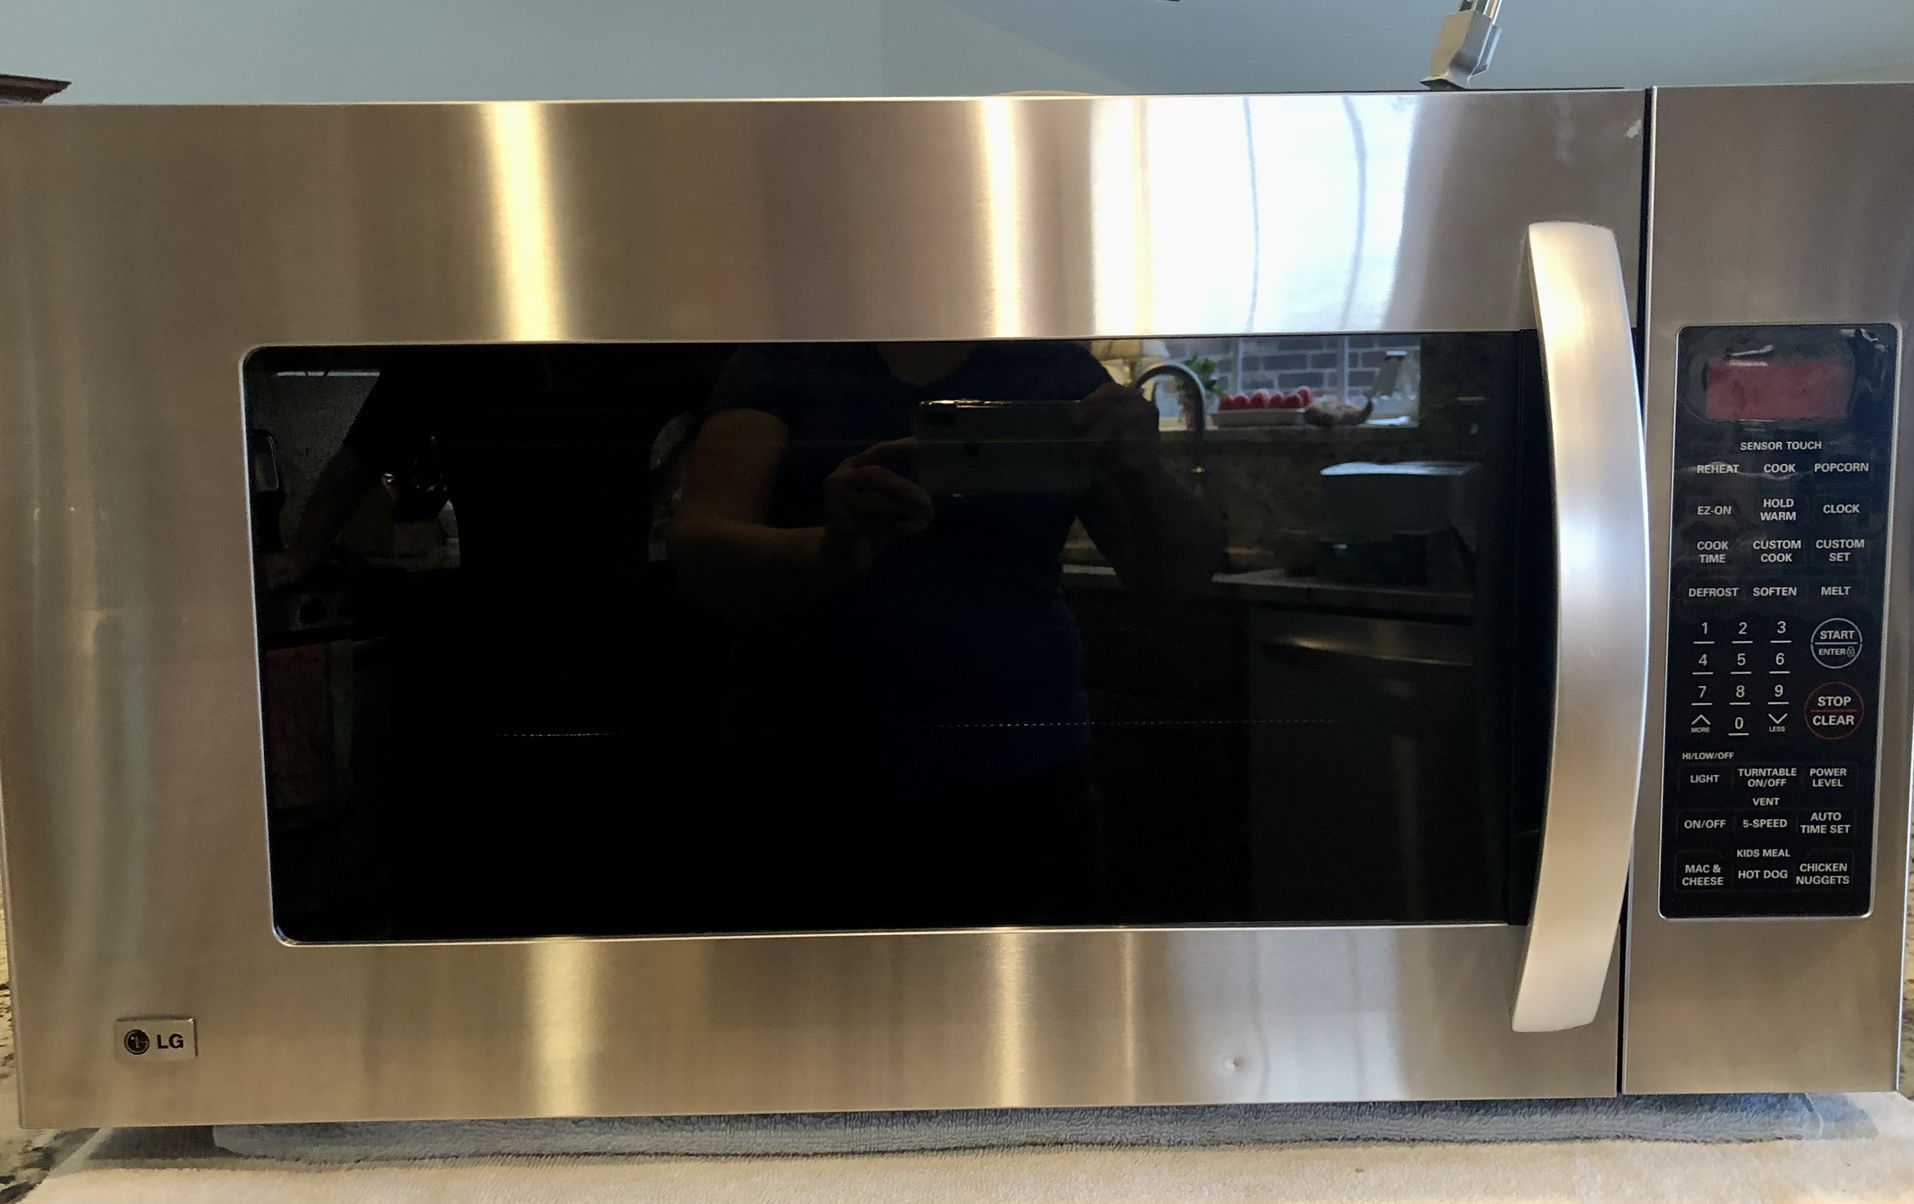 LG Microwave Stainless Black 1100W Over Range